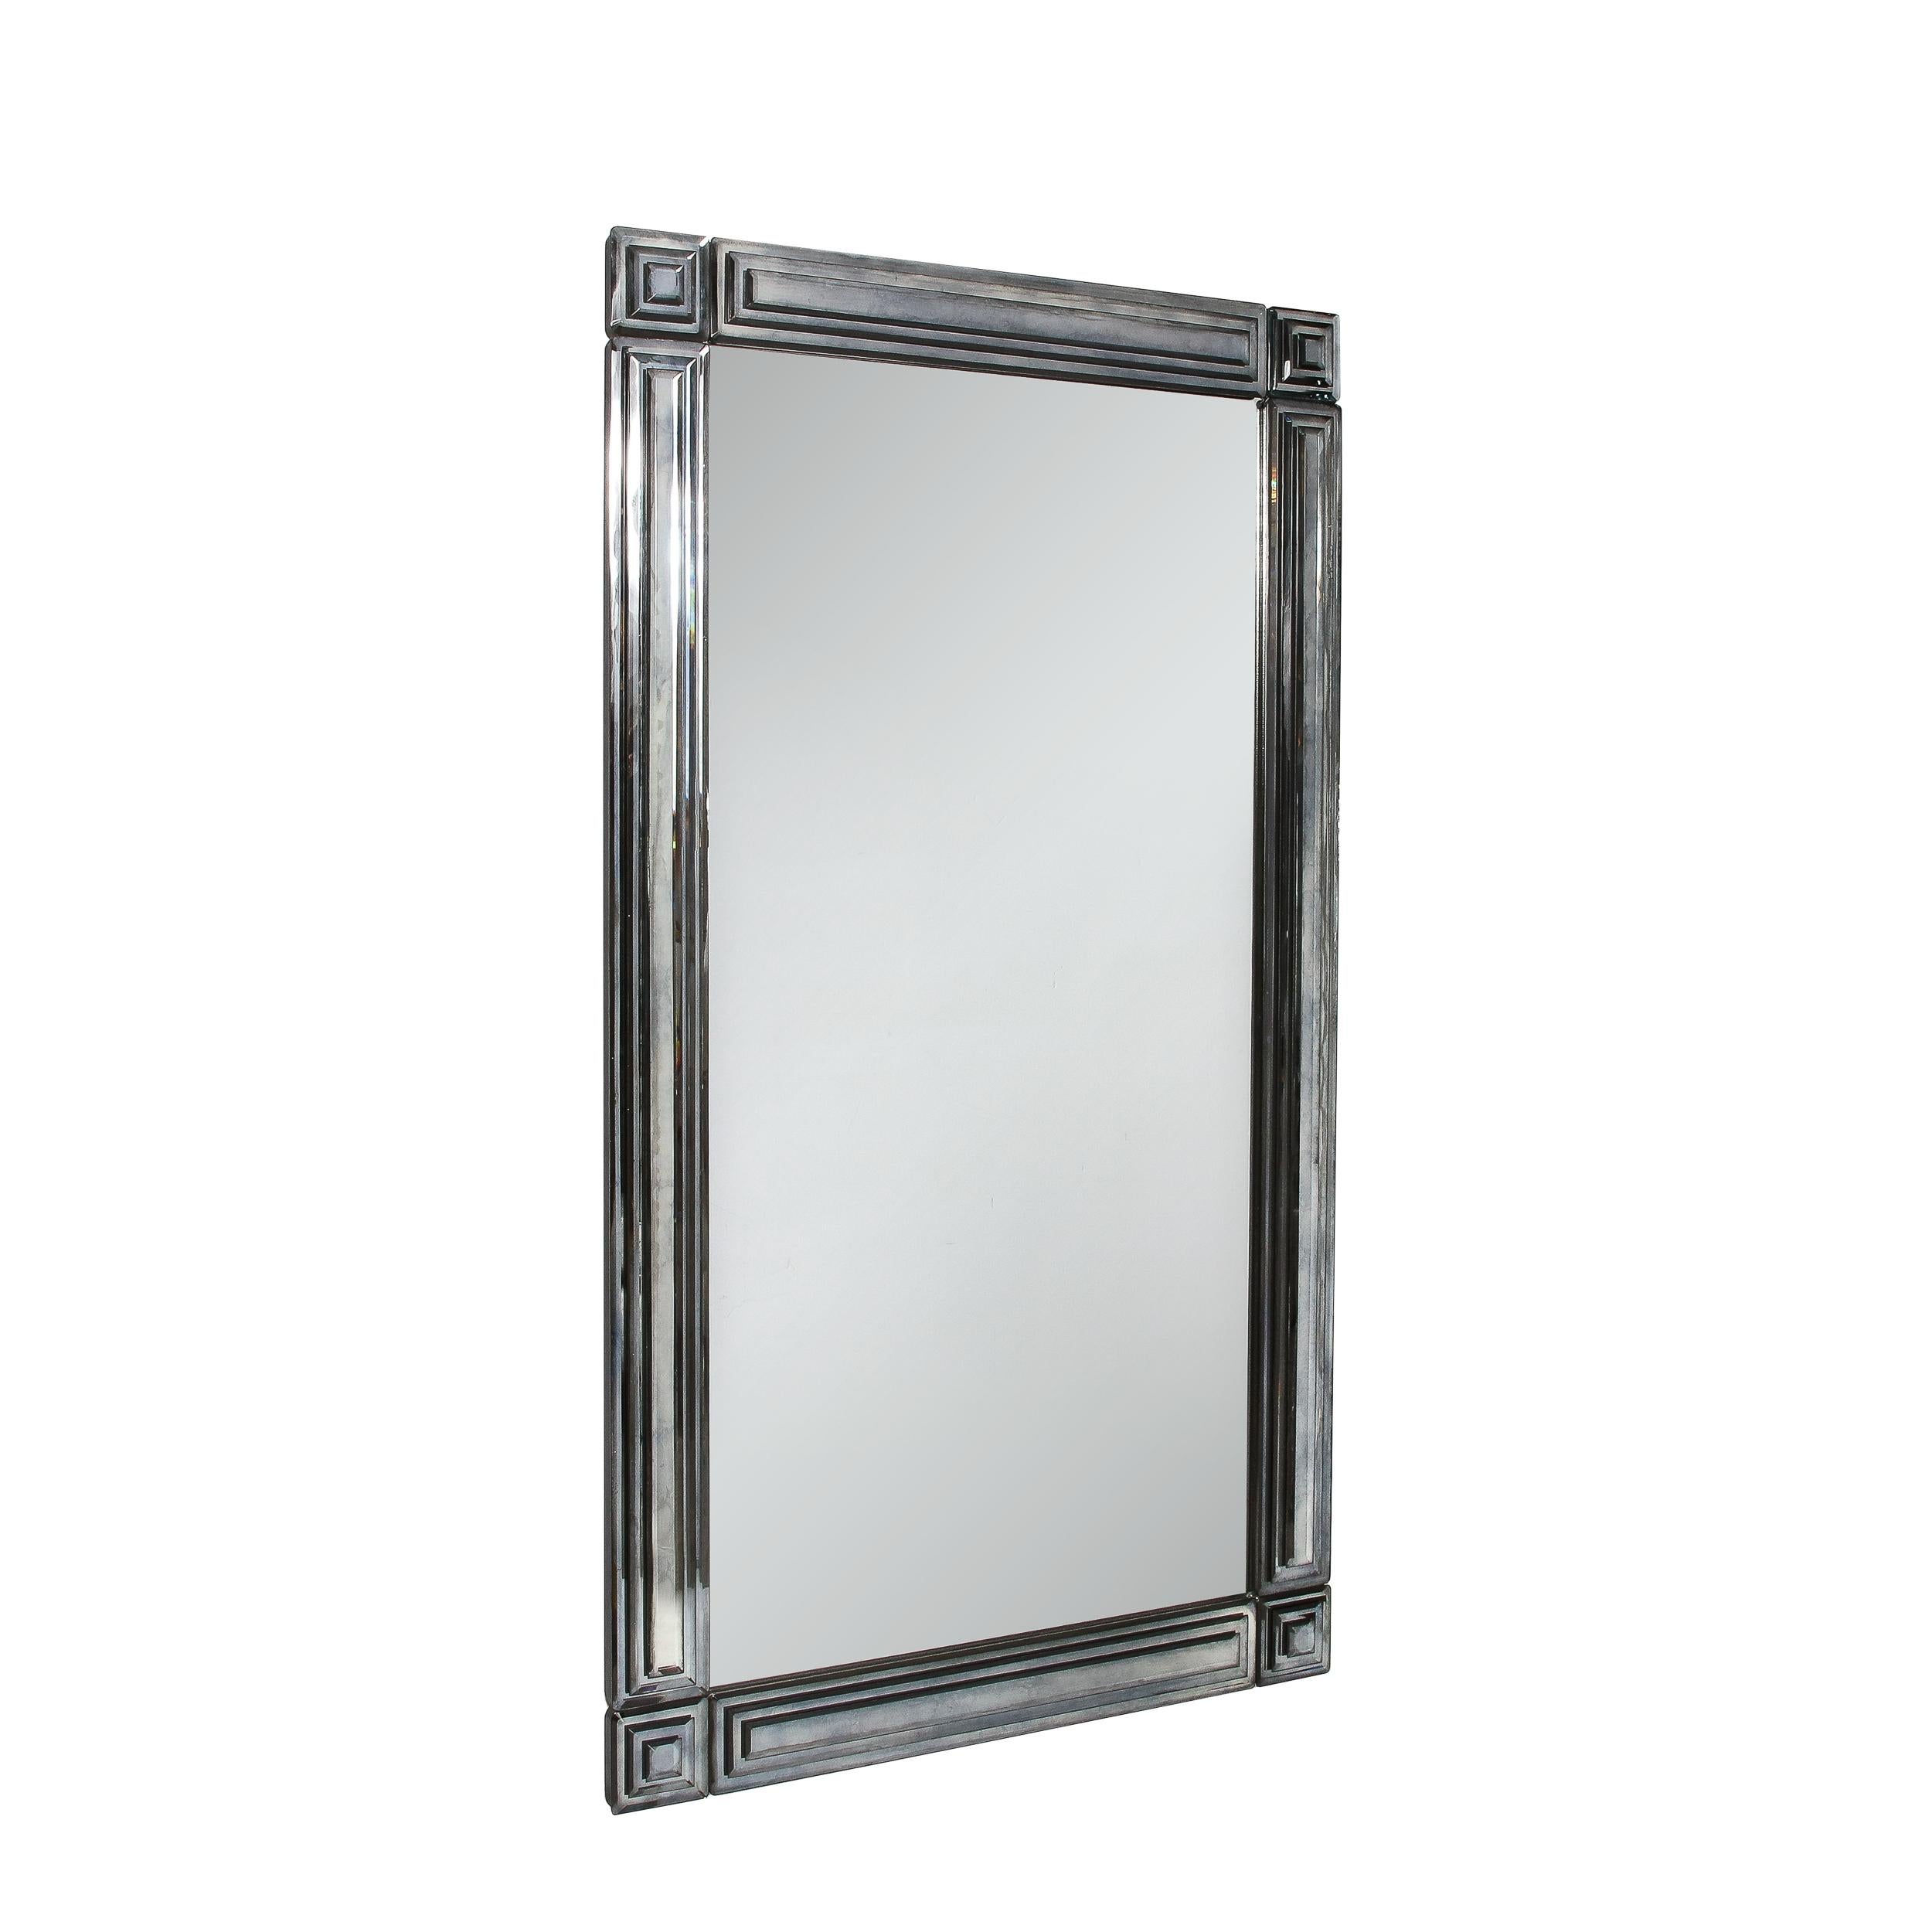 This beautiful Mid-Century Modernist Mirror with Tiered and Beveled Geometric Smoked Border originates from the United States, Circa 1970. Featuring a vertical profile with a stunning surface, this piece has a bold presence, accentuated by the